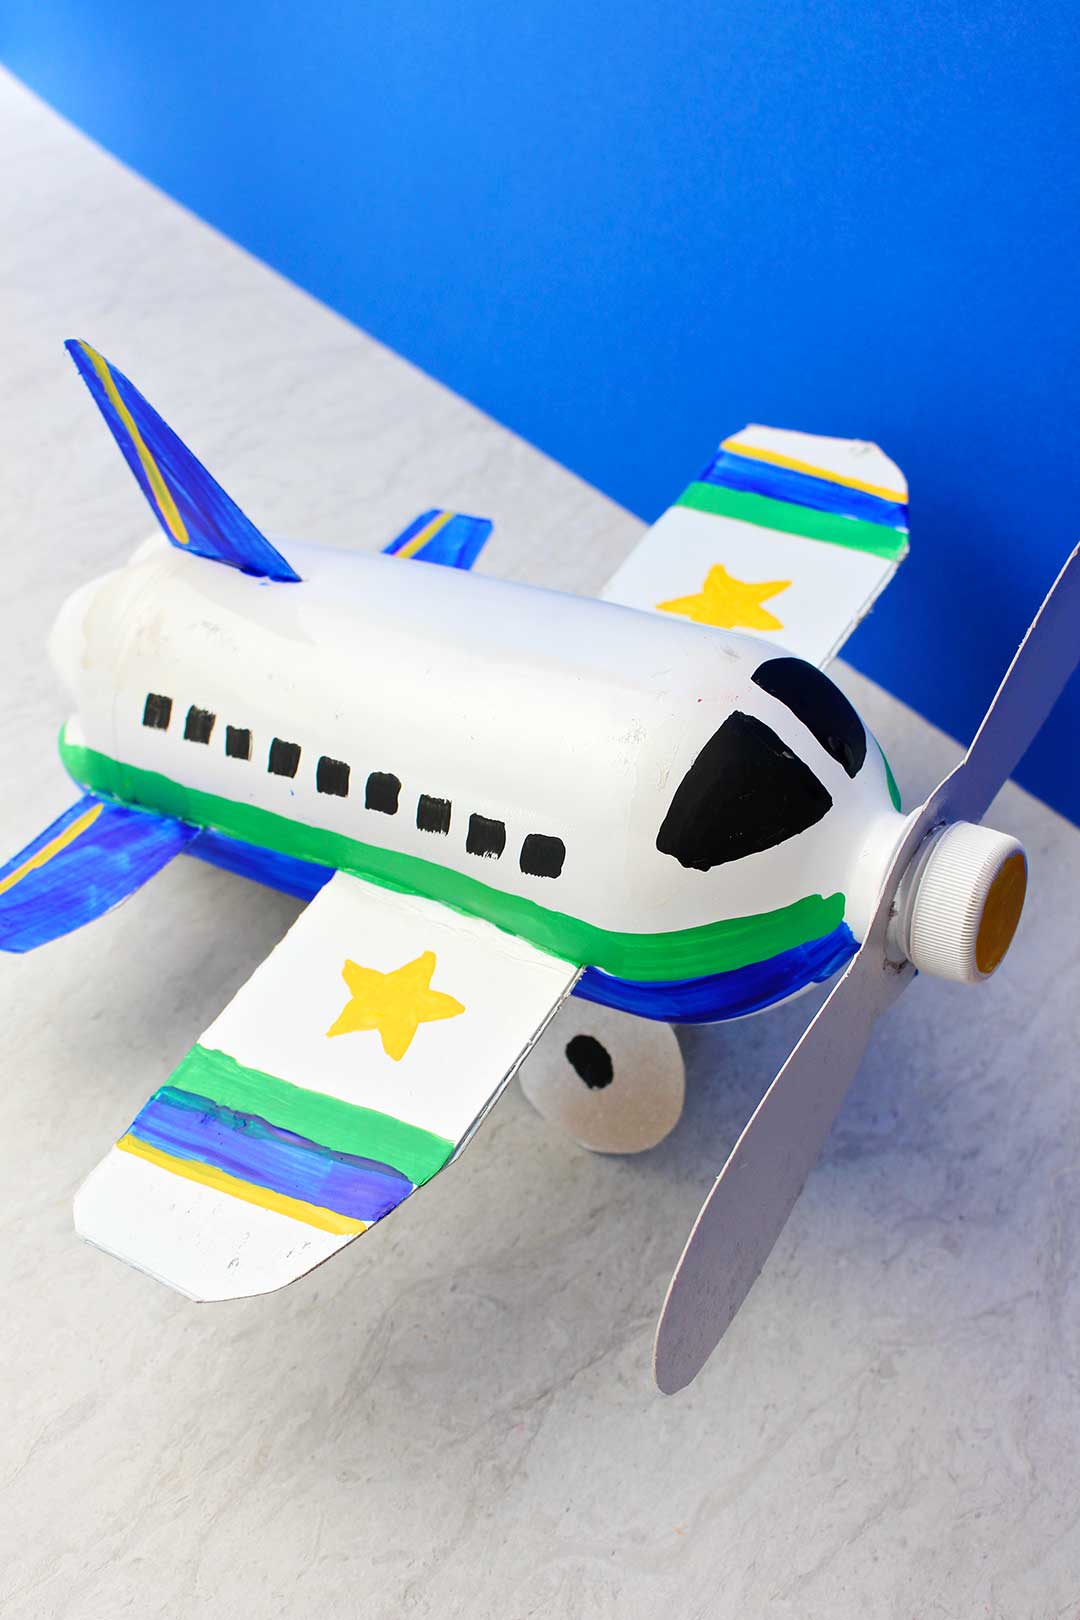 Overhead view of fully painted and completed airplane bottle craft against a blue backdrop.